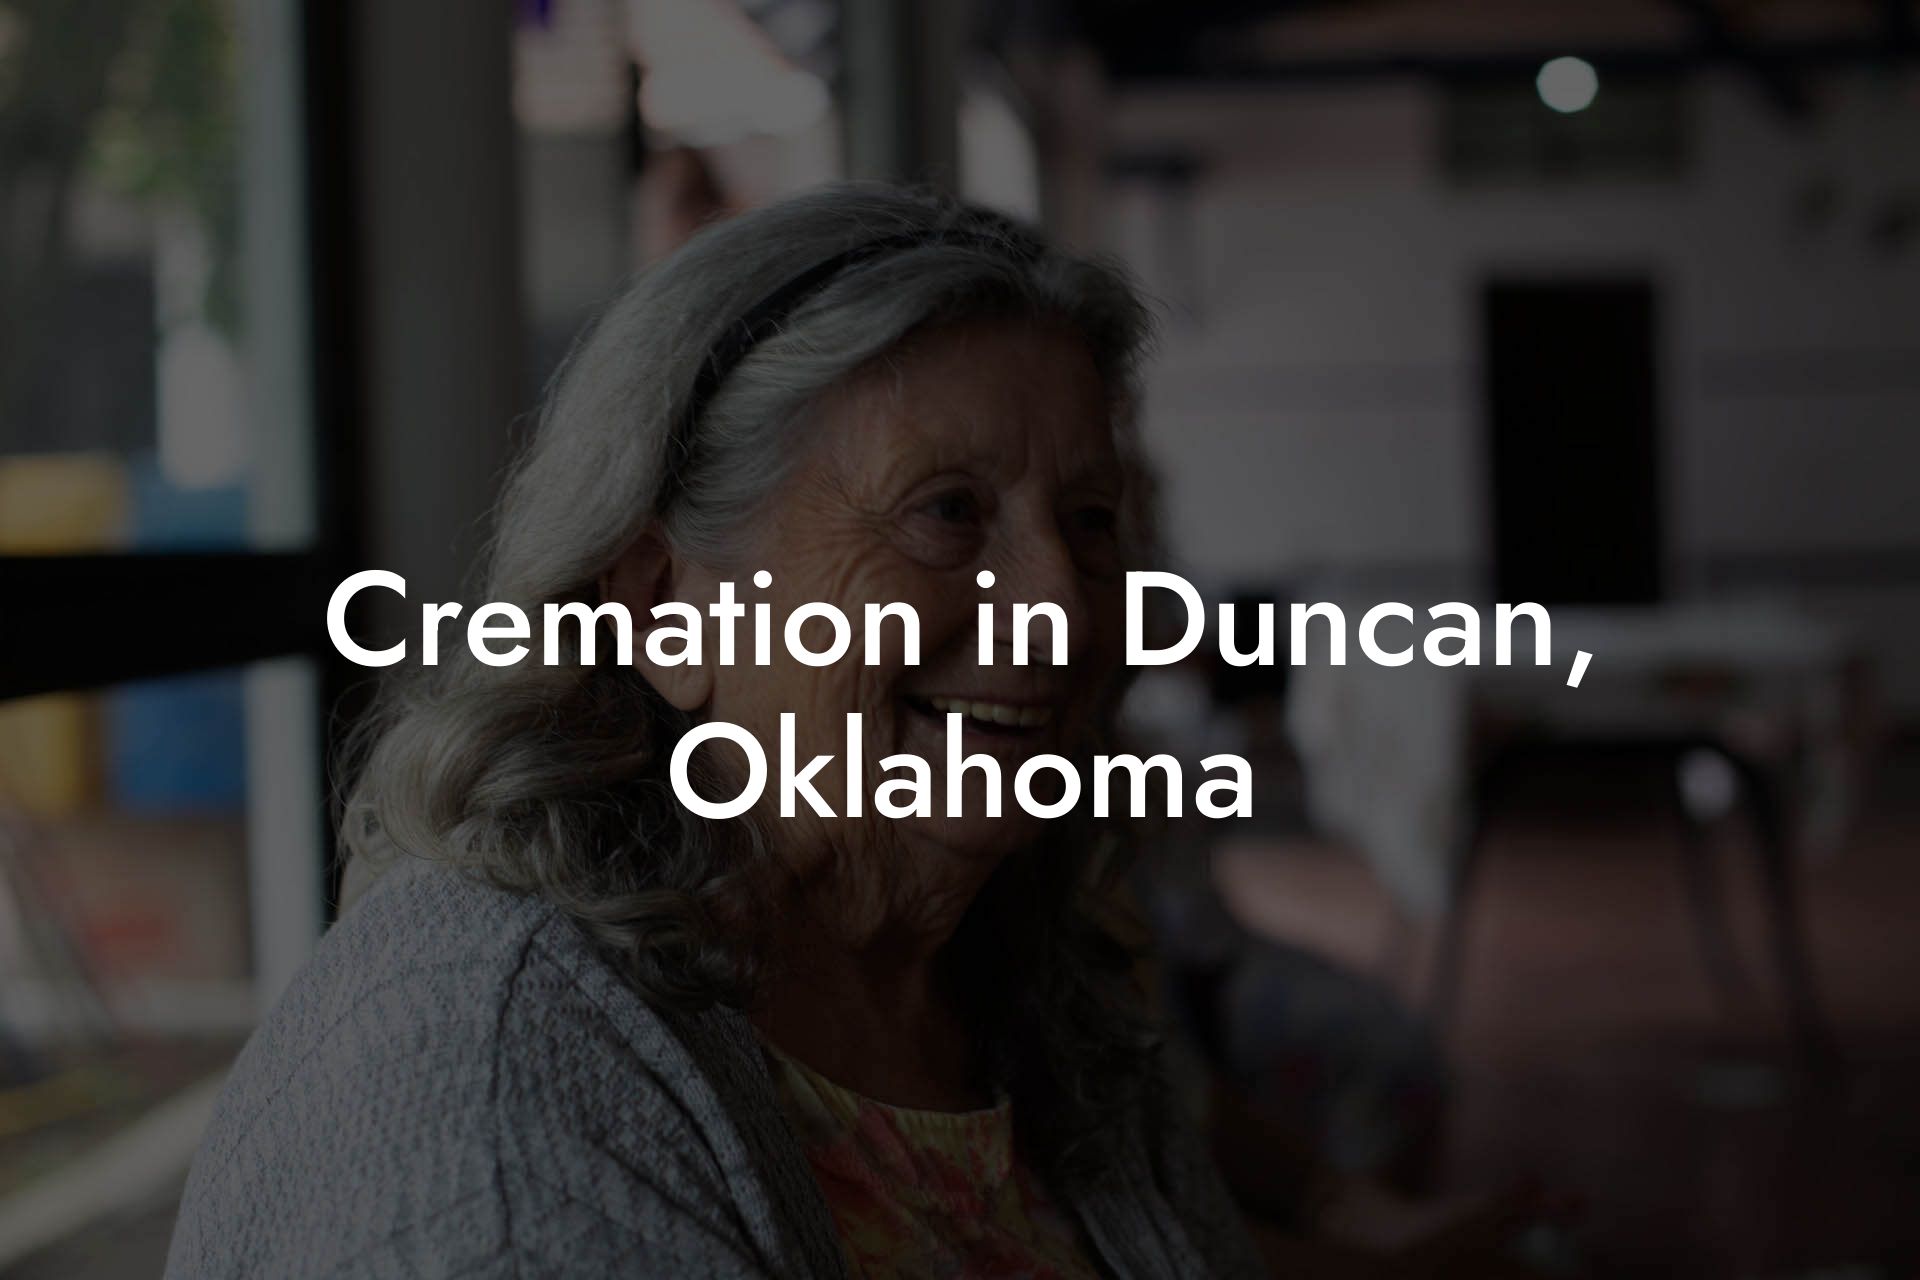 Cremation in Duncan, Oklahoma